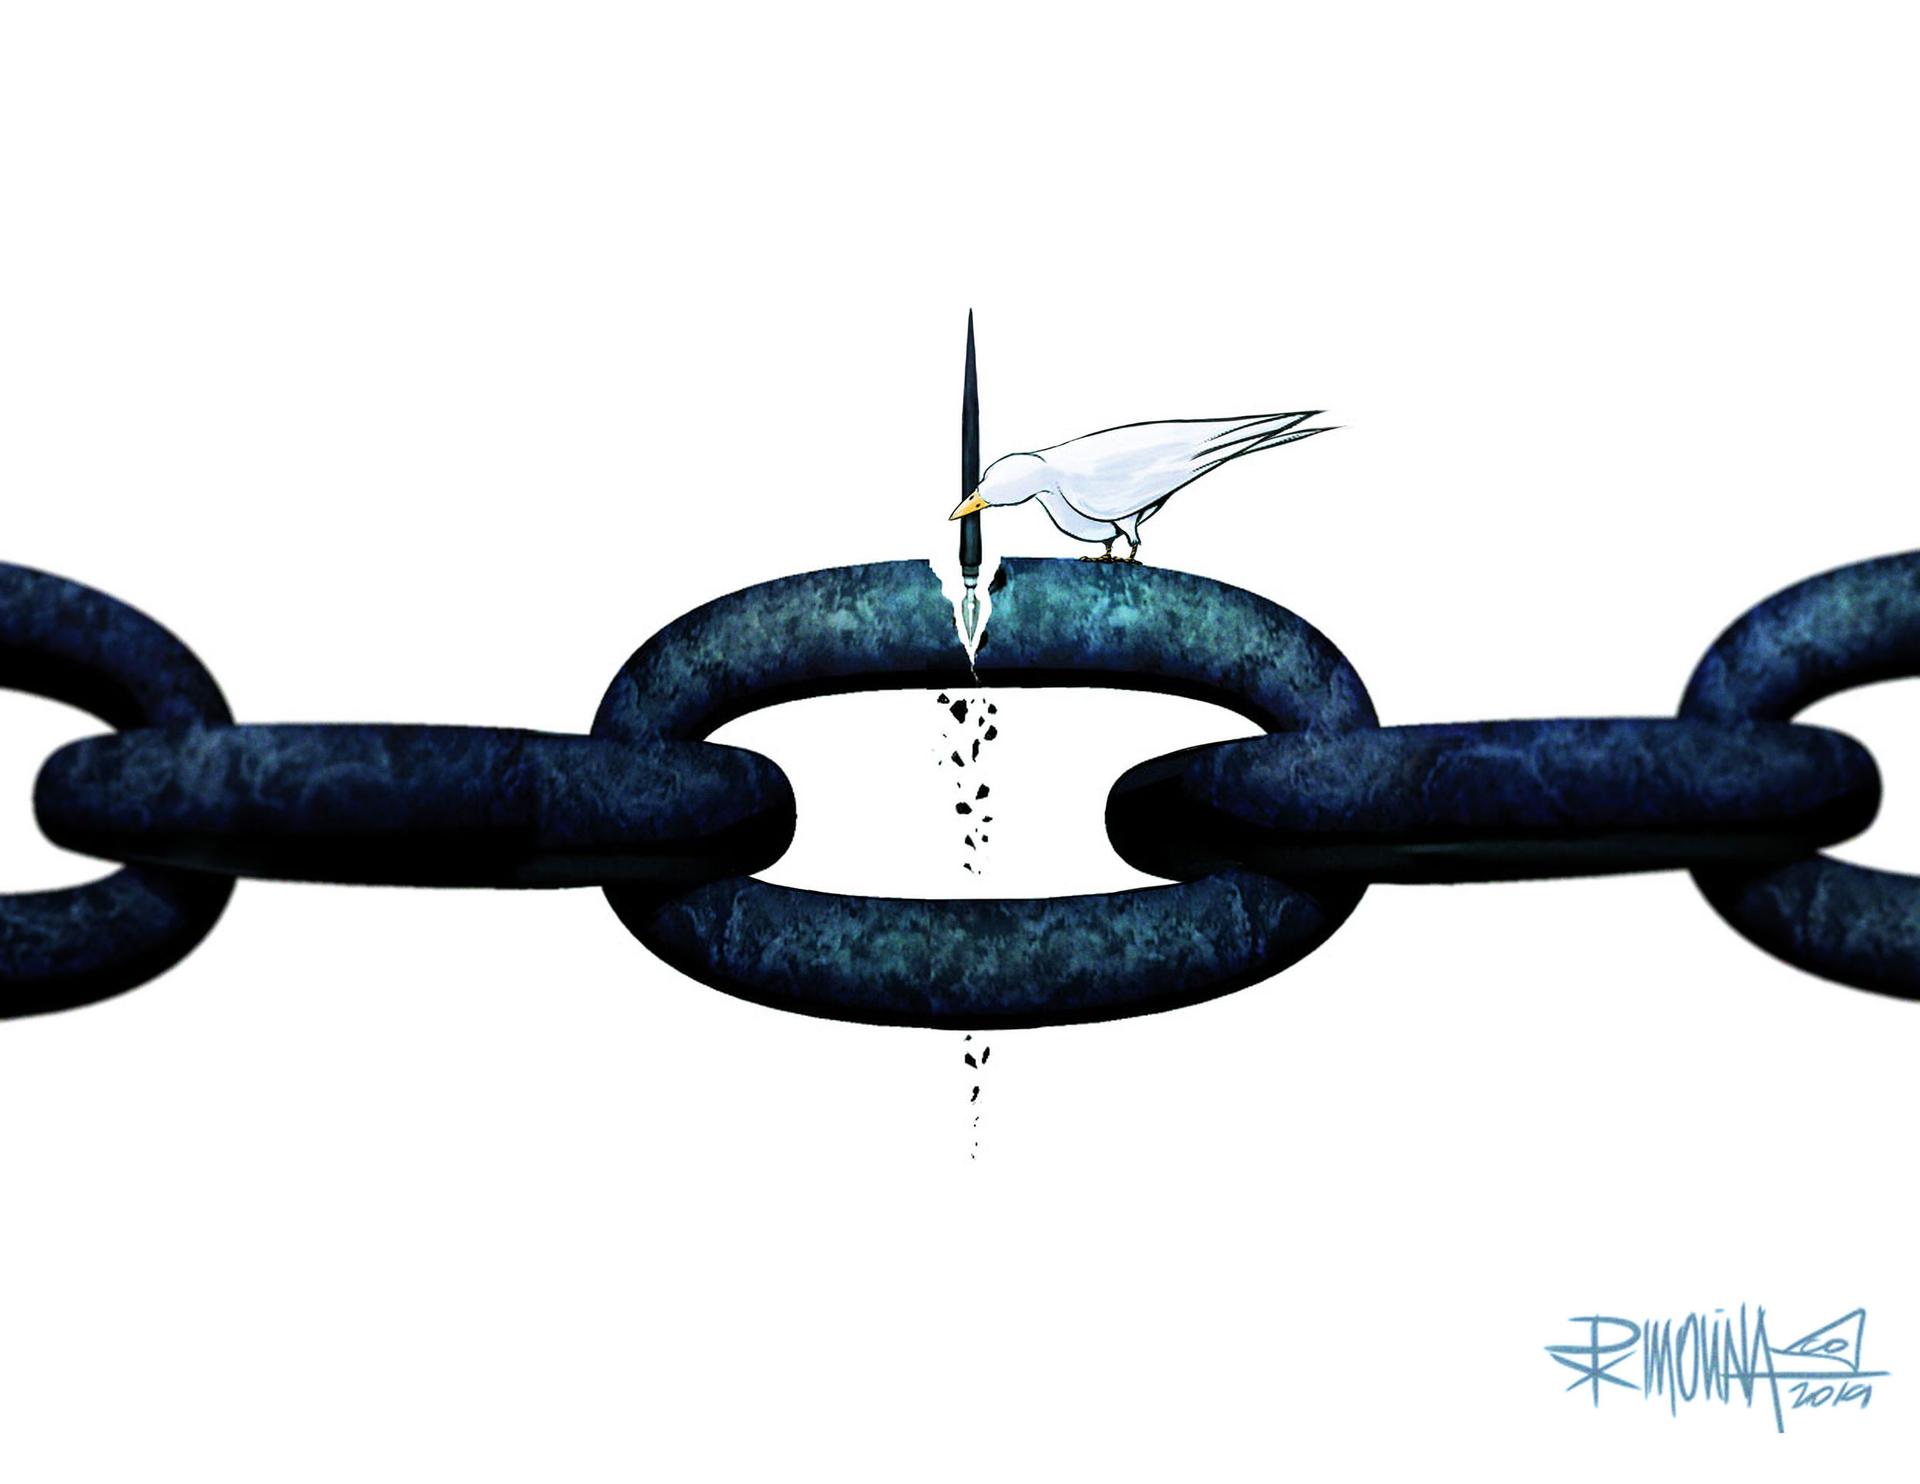 A cartoon showing a large chain and a white bird with a pen cracking through the chain.